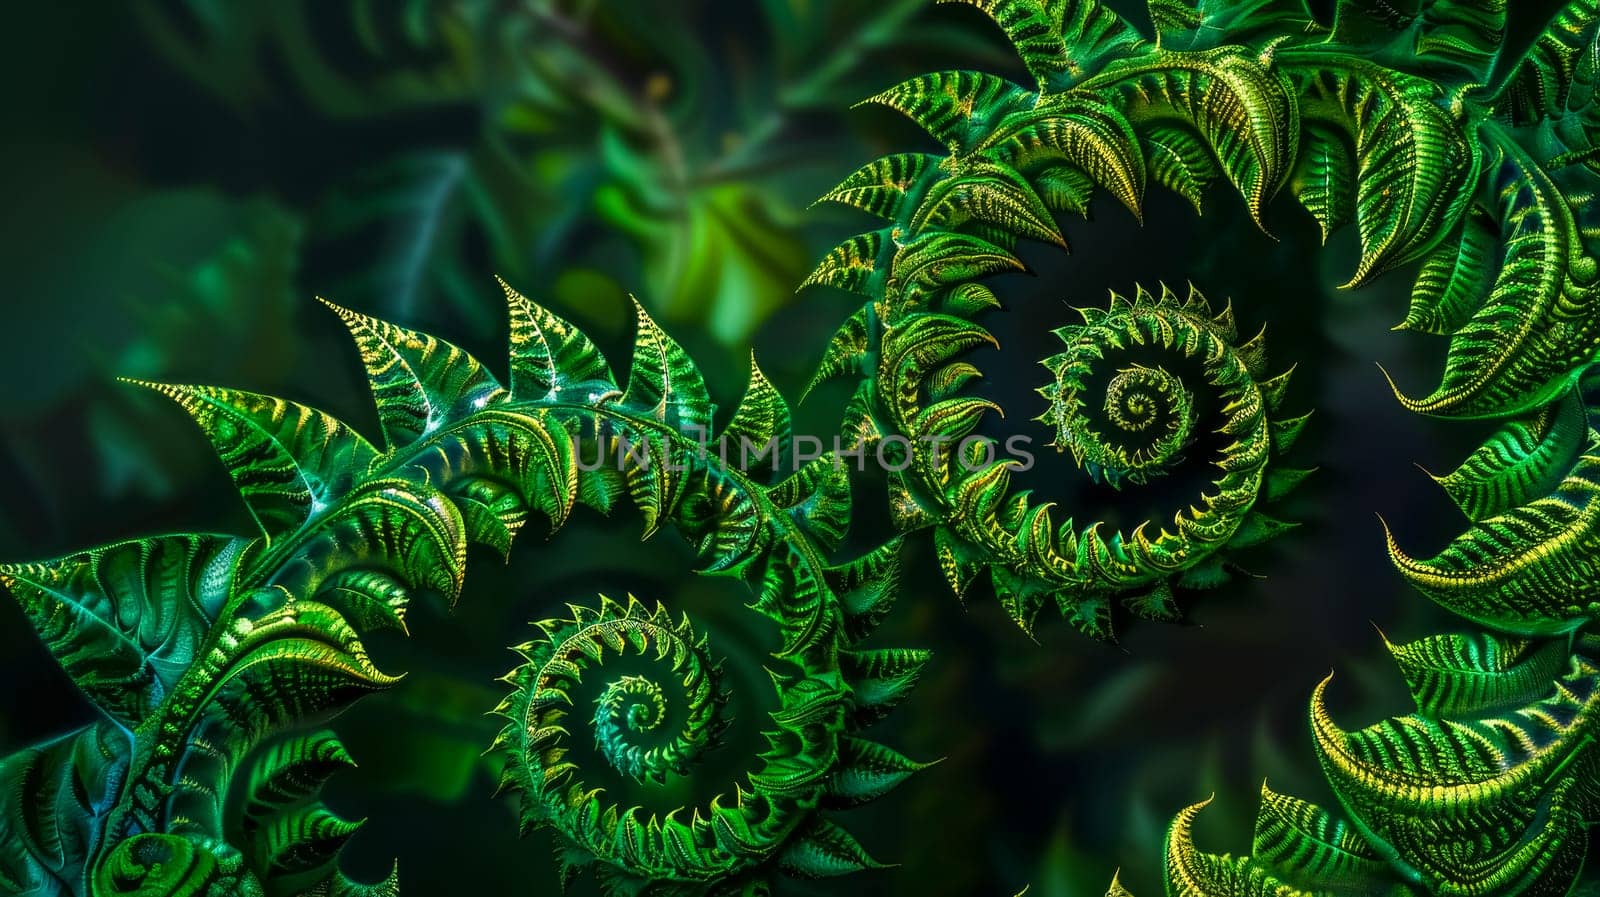 Digital fractal spirals with a lush green fern-like pattern, symbolizing growth and nature